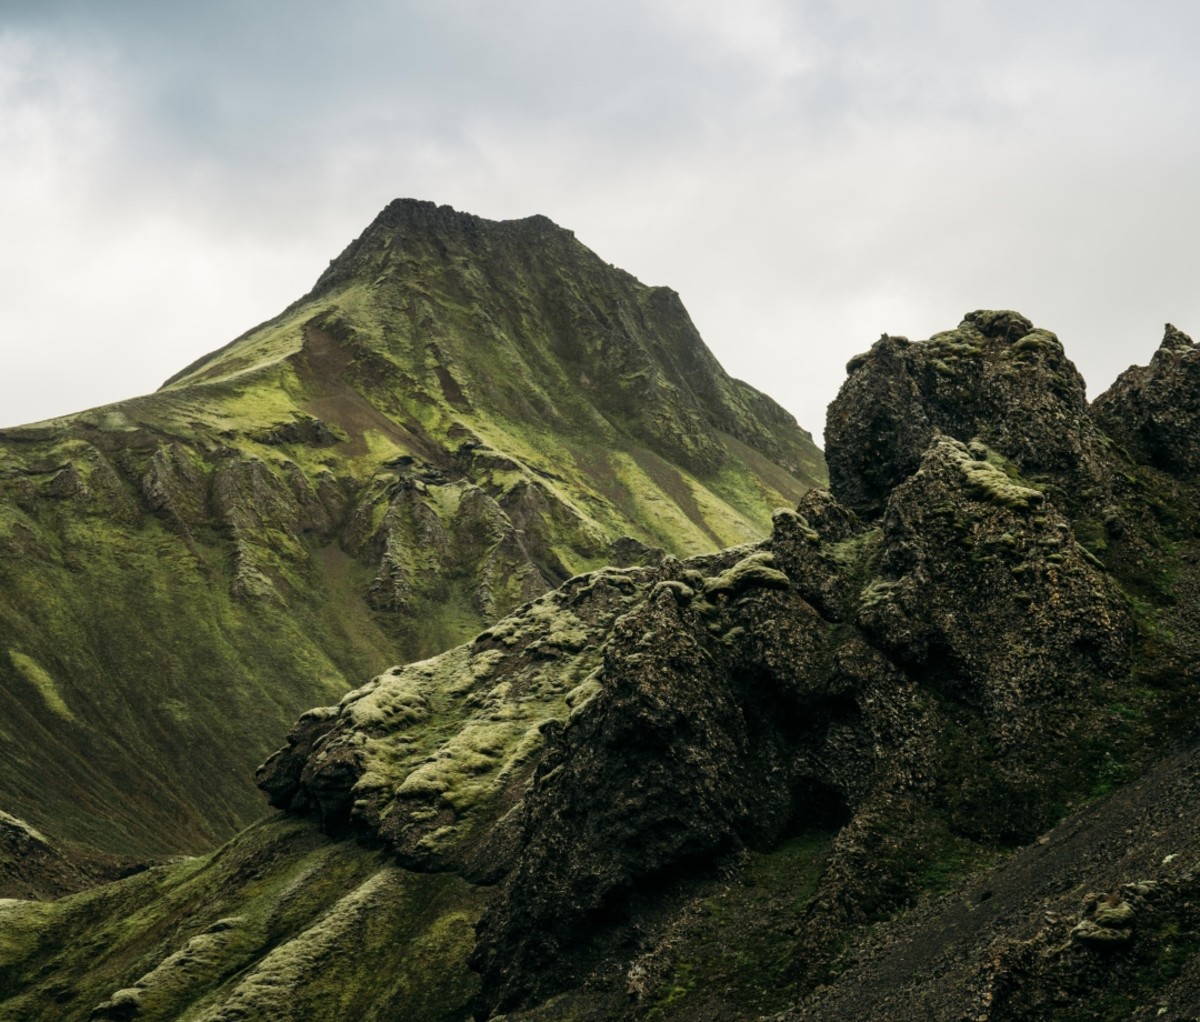 View of a green mountain cliff in Iceland. 57hours